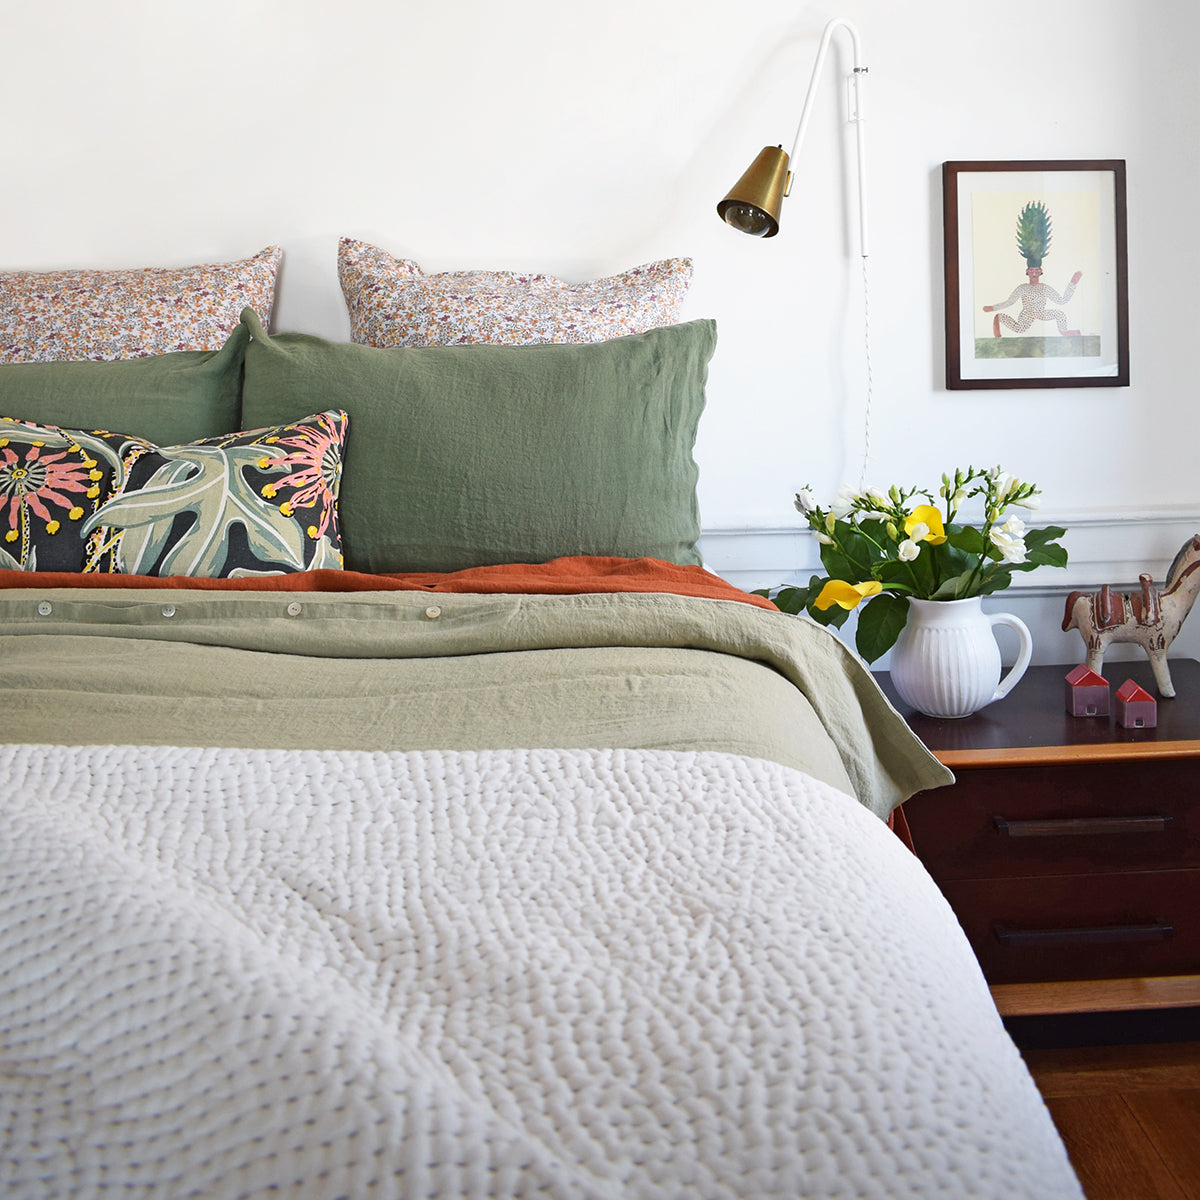 Linge Particulier Jade Green Standard Linen Pillowcase Sham with a stitched Indian quilt and green Utopia Goods pillow for a colorful linen bedding look in camo green - Collyer&#39;s Mansion